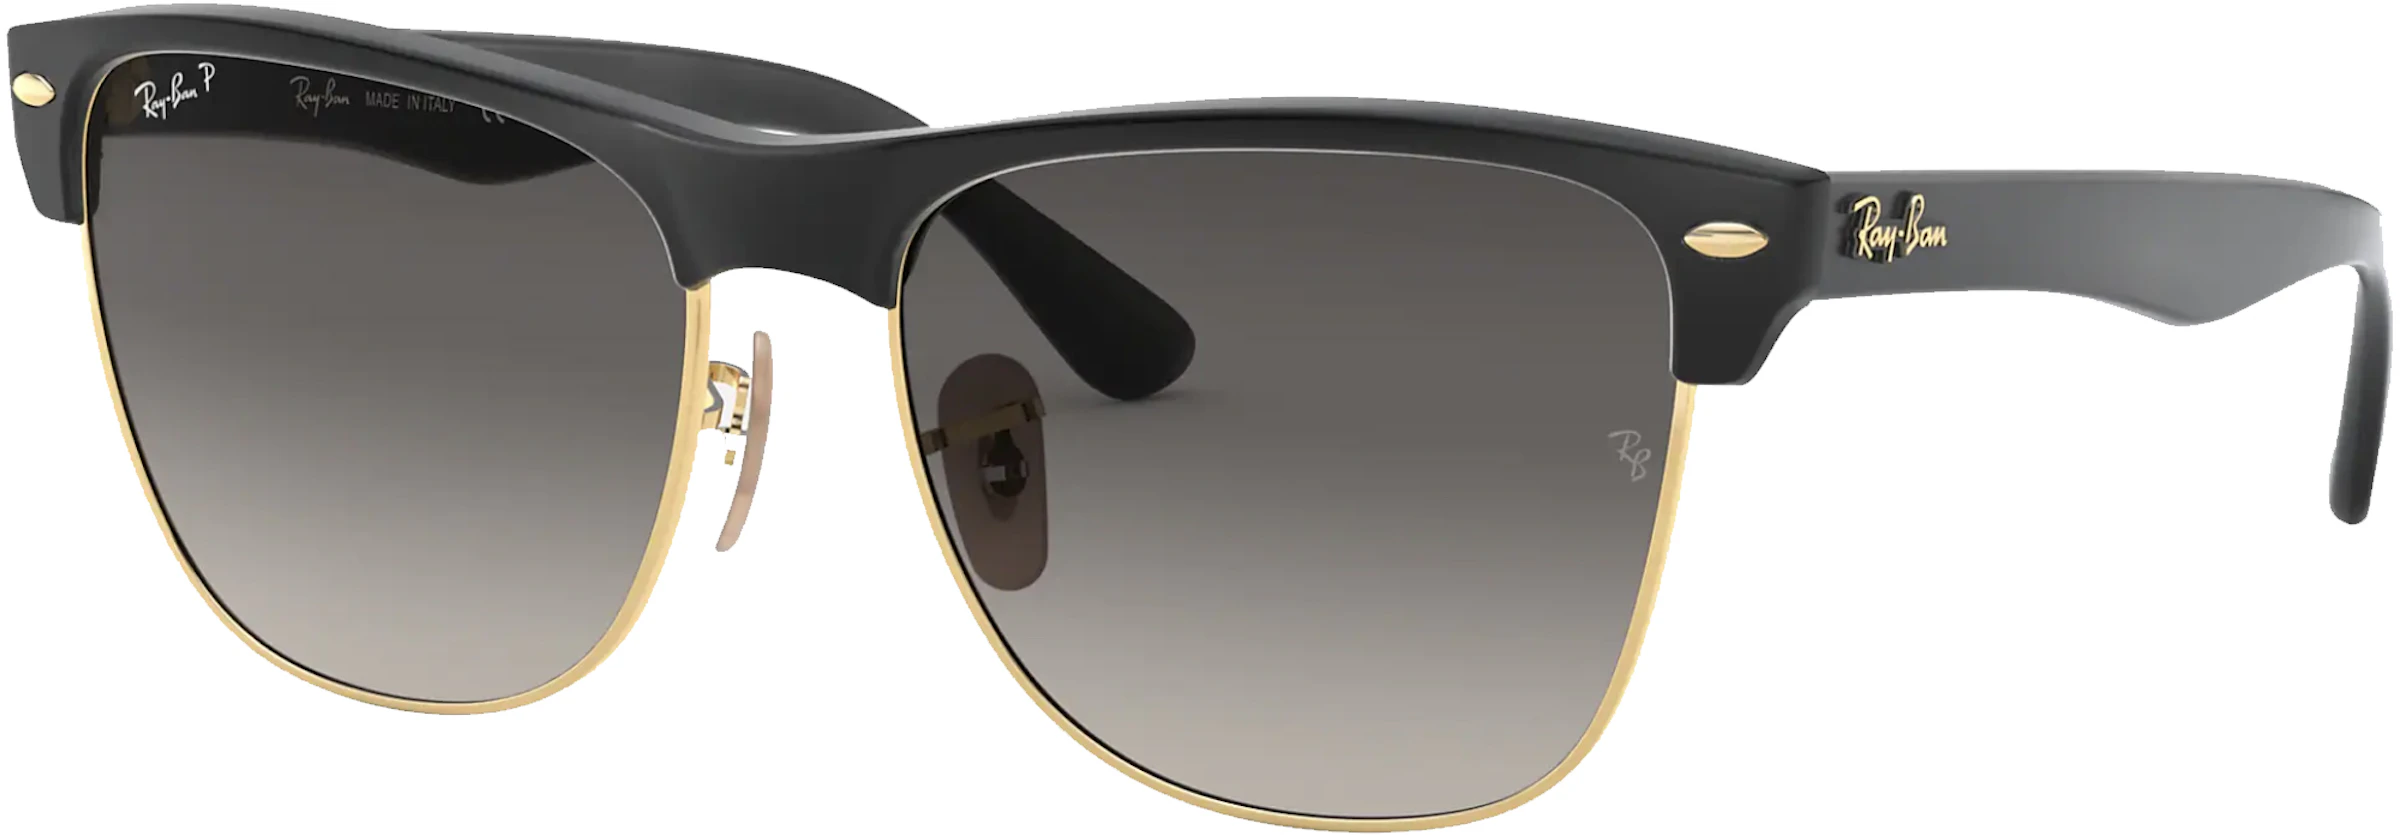 Nominaal specificatie Albany Ray-Ban Clubmaster Oversized Sunglasses Gloss Black/Grey Gradient - SS21 -  US